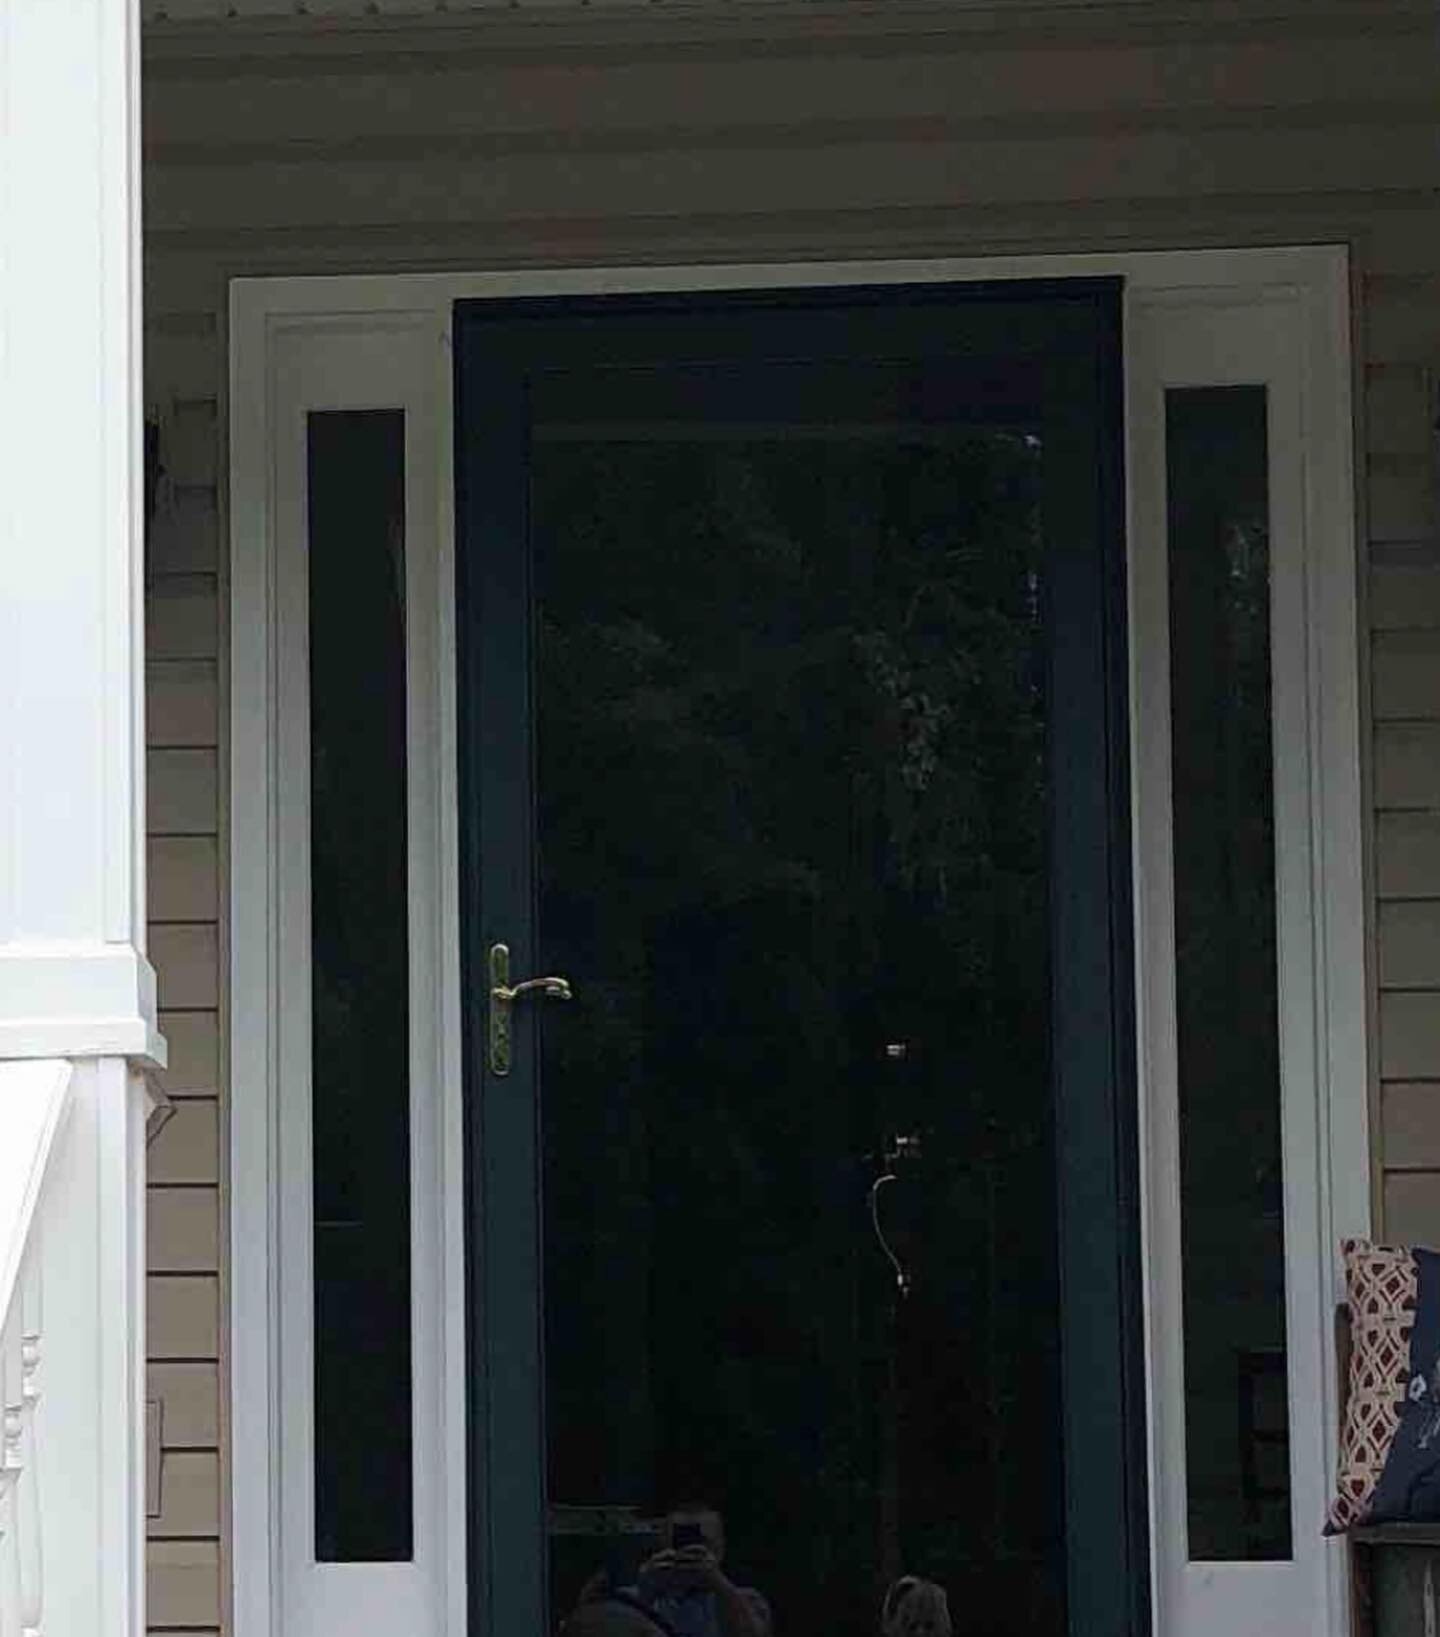 Before and after. We love how this new French door changed the look of the home. #vfdoors #veteranowned #charlotte #homeremodel #newdoor #cloversc